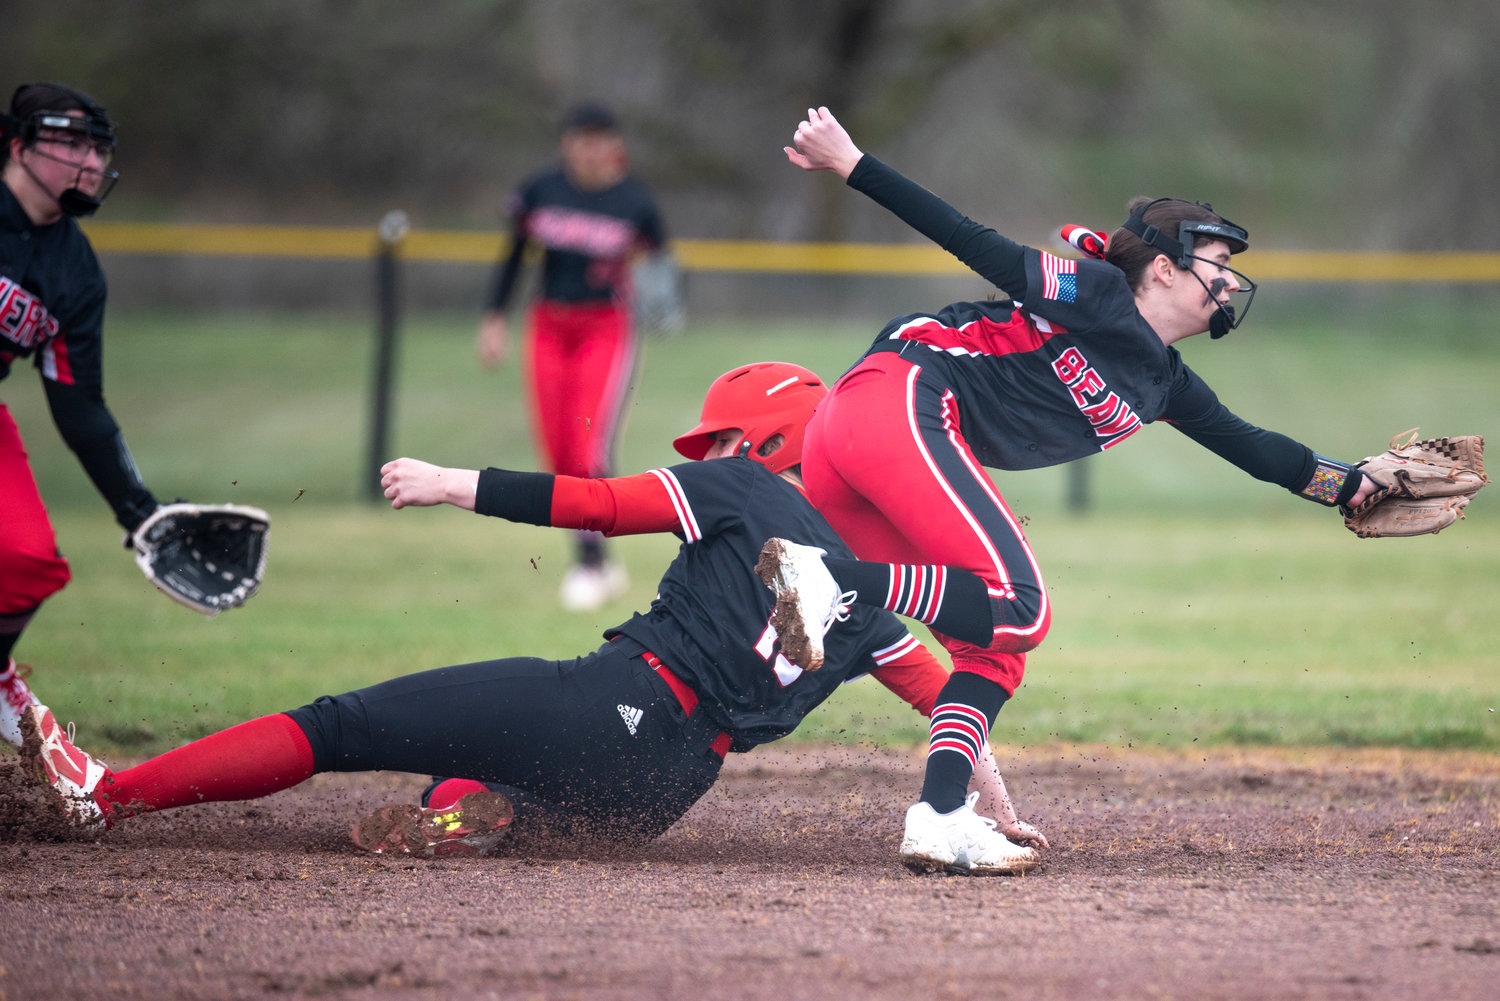 Tenino's Kayla Feltus, right, dives for a throw from the Beavers' catcher as a Toledo baserunner slides safely into second base on March 16.